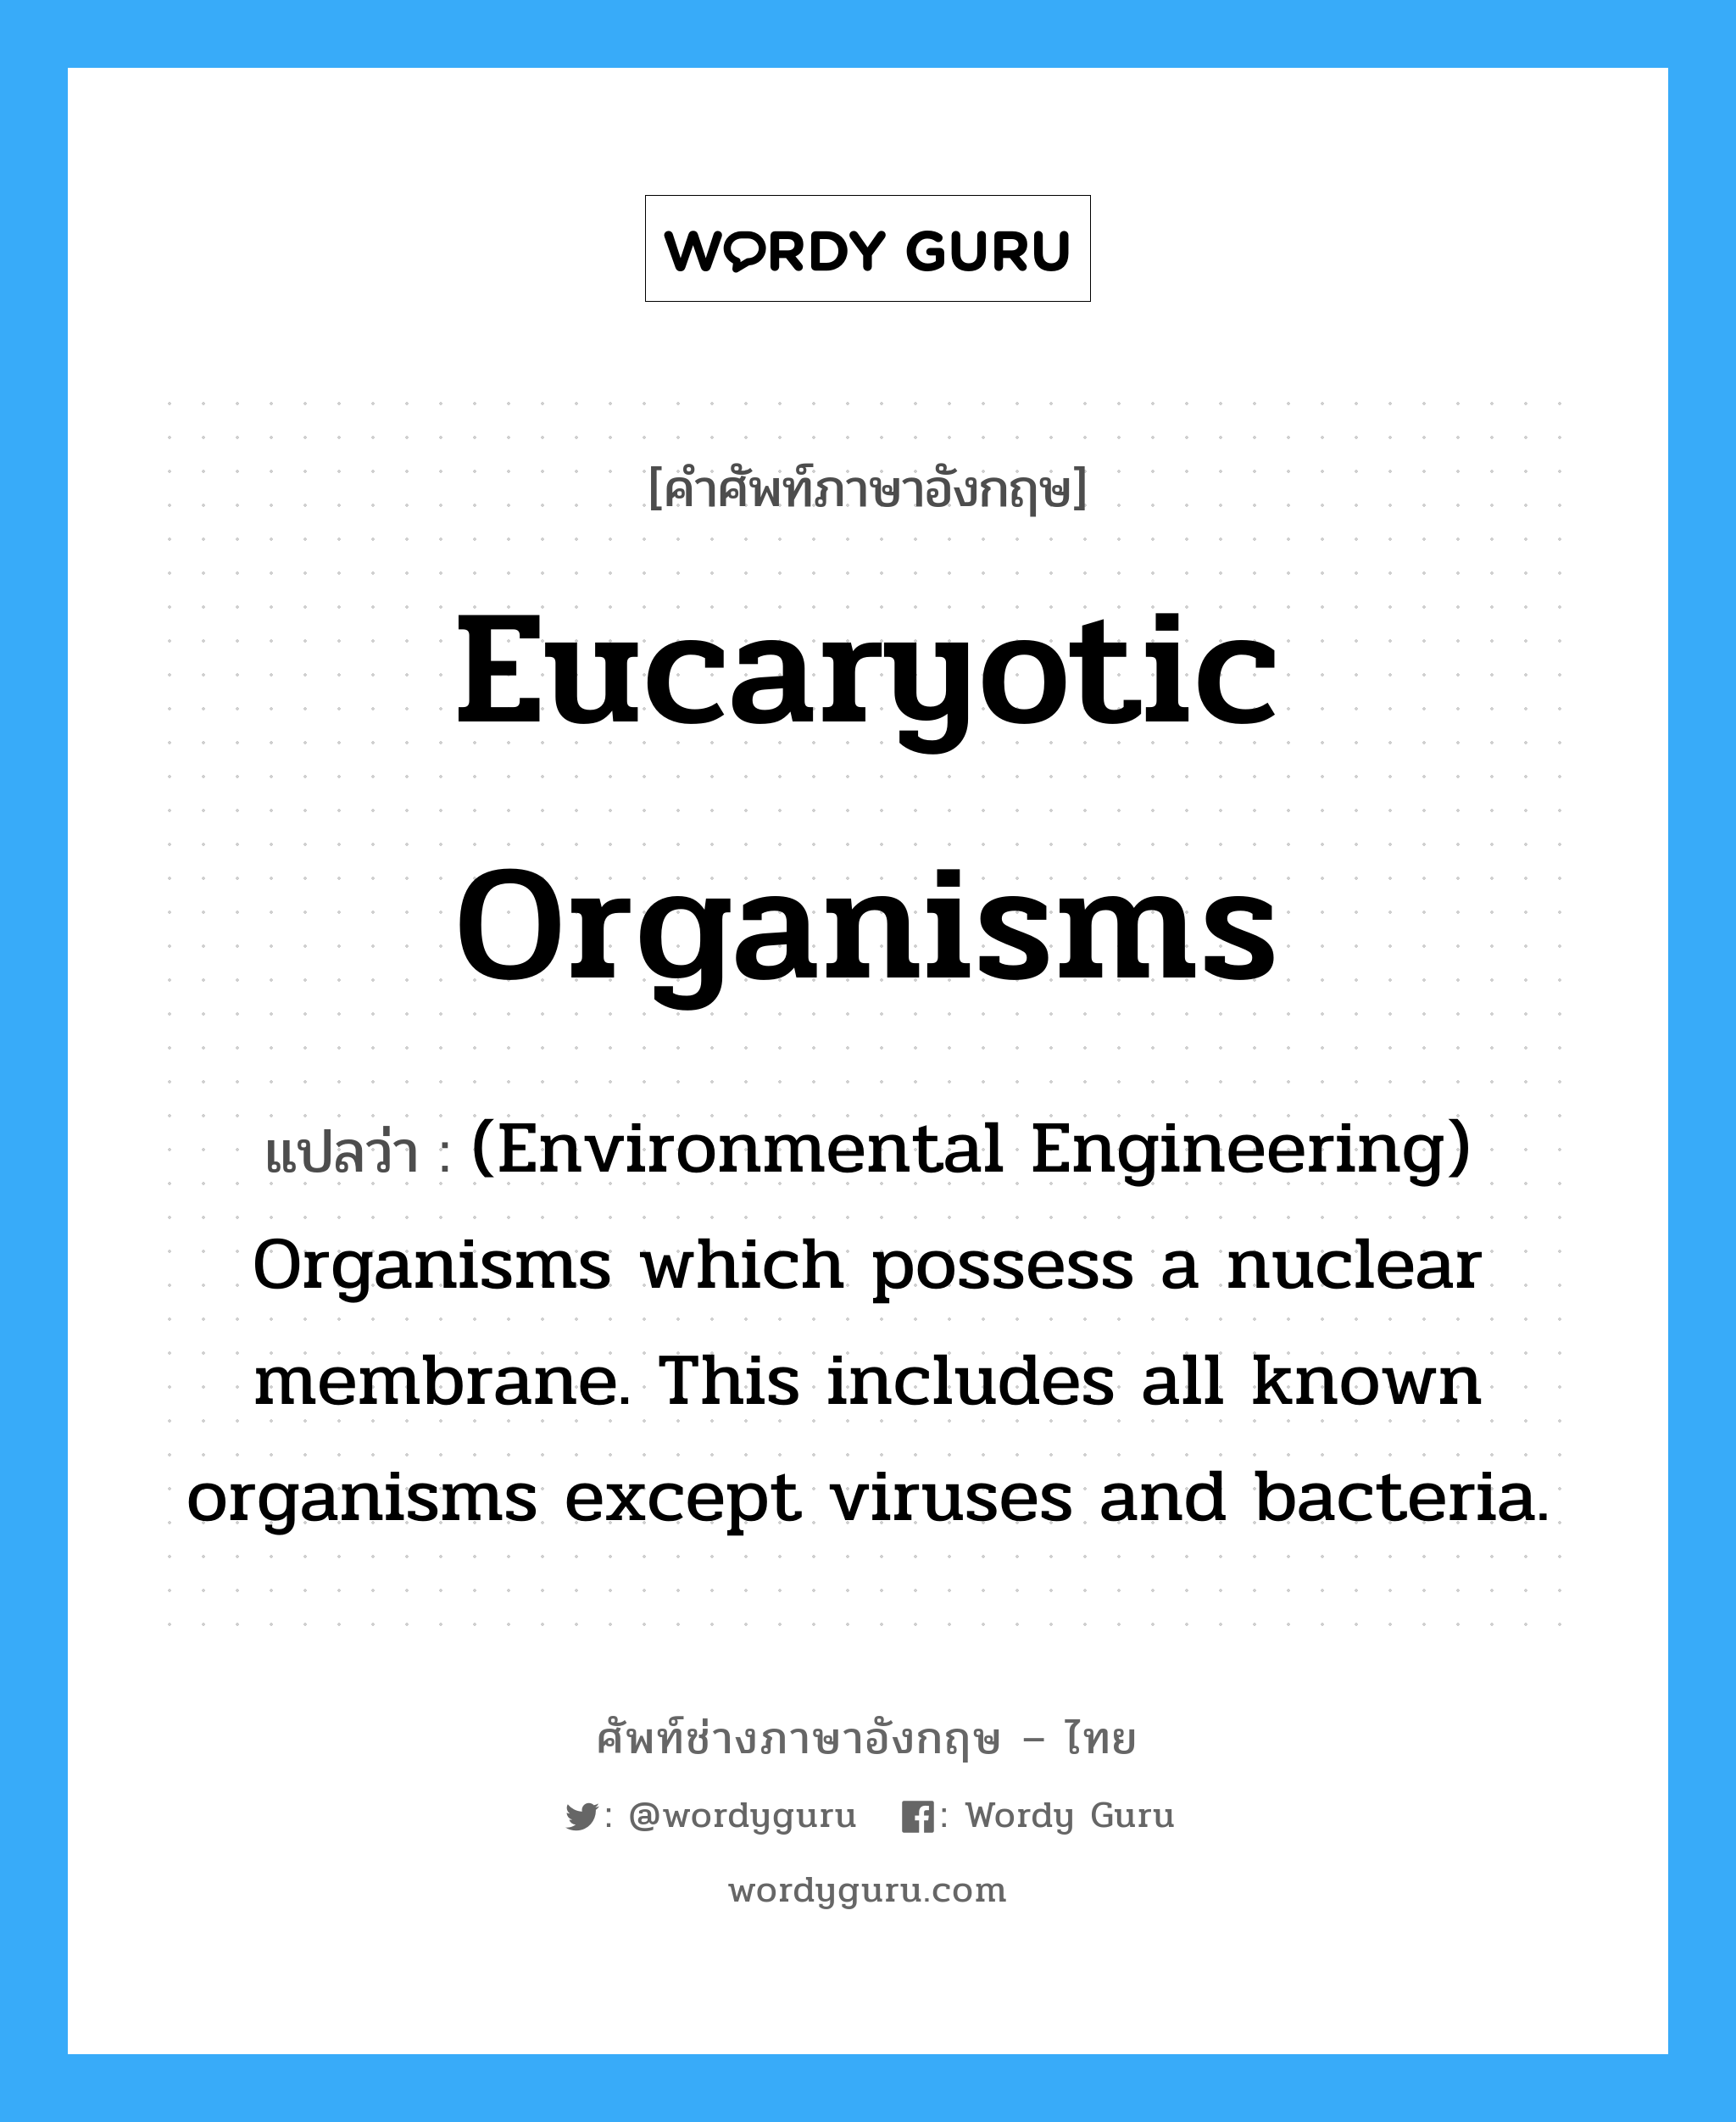 Eucaryotic organisms แปลว่า?, คำศัพท์ช่างภาษาอังกฤษ - ไทย Eucaryotic organisms คำศัพท์ภาษาอังกฤษ Eucaryotic organisms แปลว่า (Environmental Engineering) Organisms which possess a nuclear membrane. This includes all known organisms except viruses and bacteria.